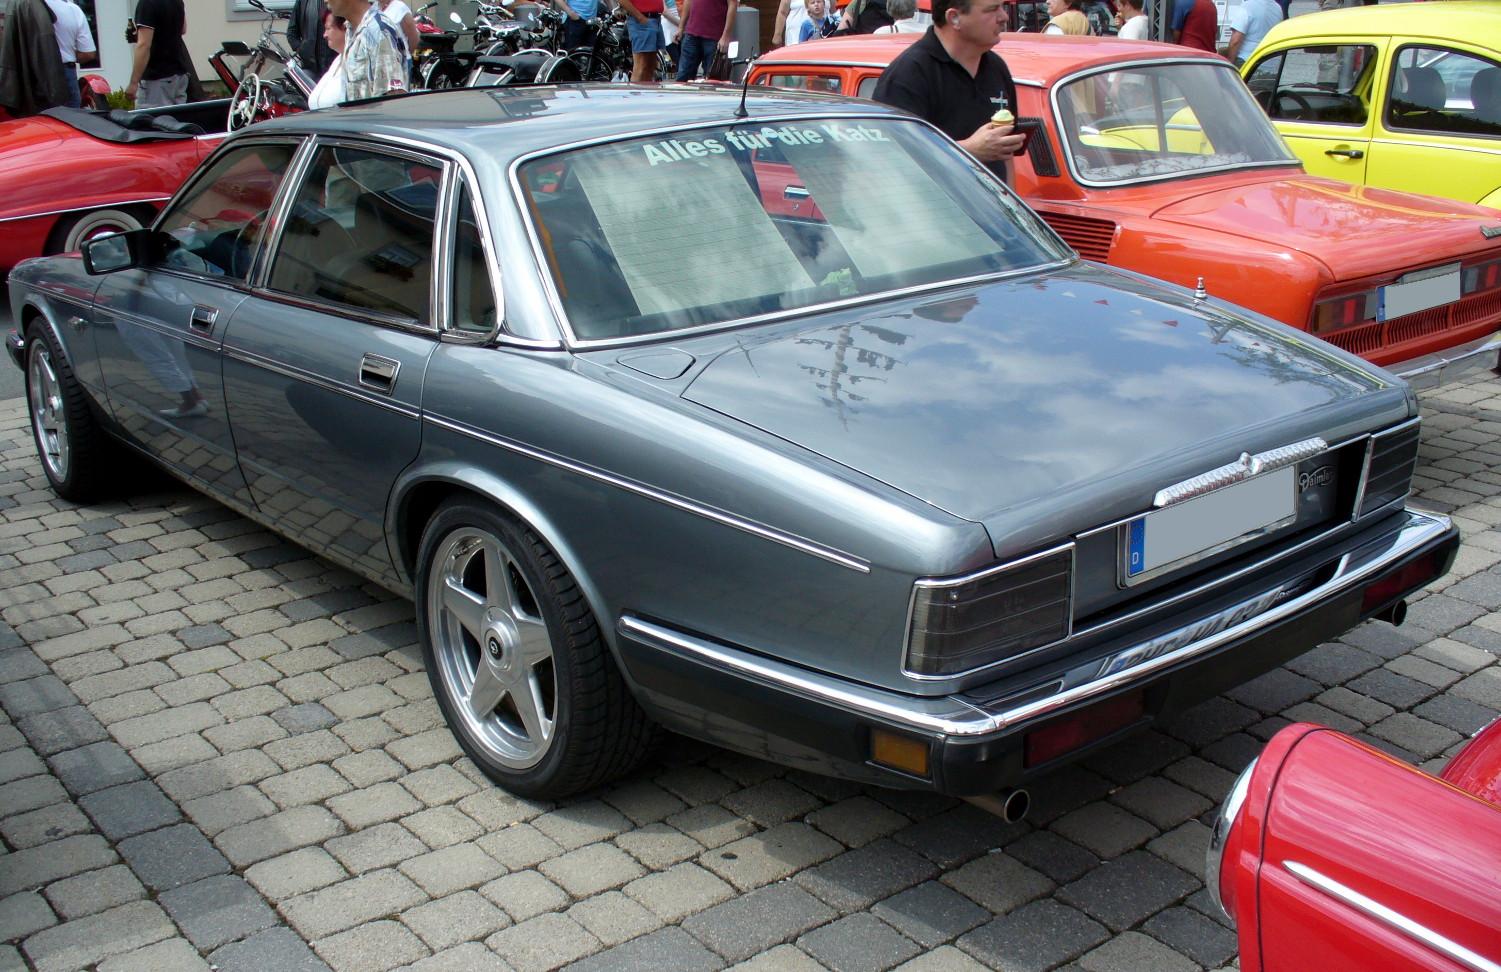 Daimler xj. Best photos and information of model.